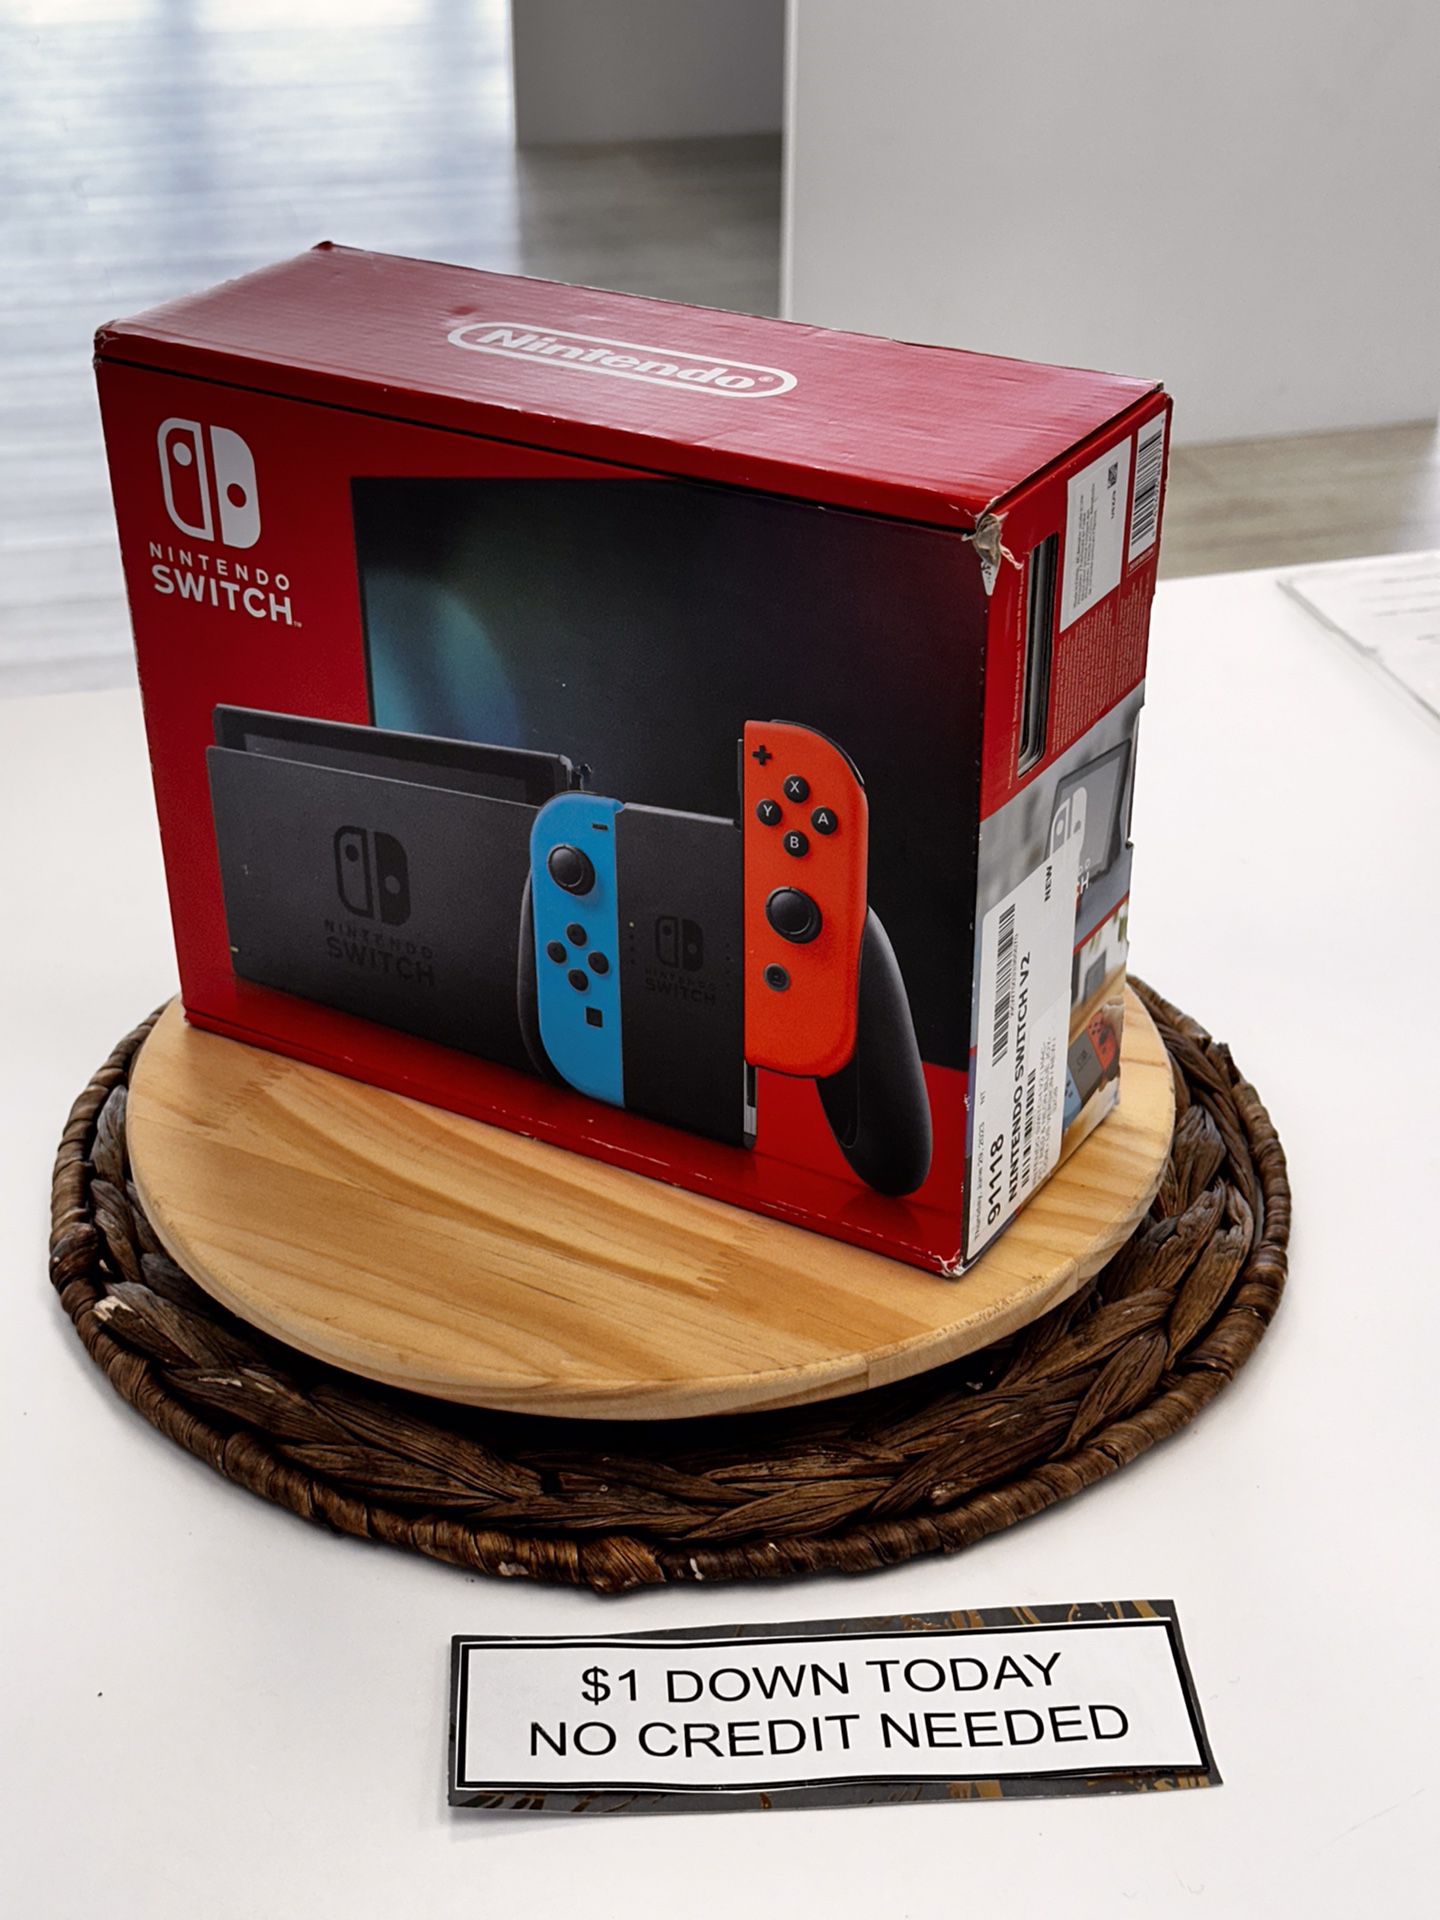 Nintendo Switch V2 Gaming Console NEW - Pay $1 Today to Take it Home and Pay the Rest Later!